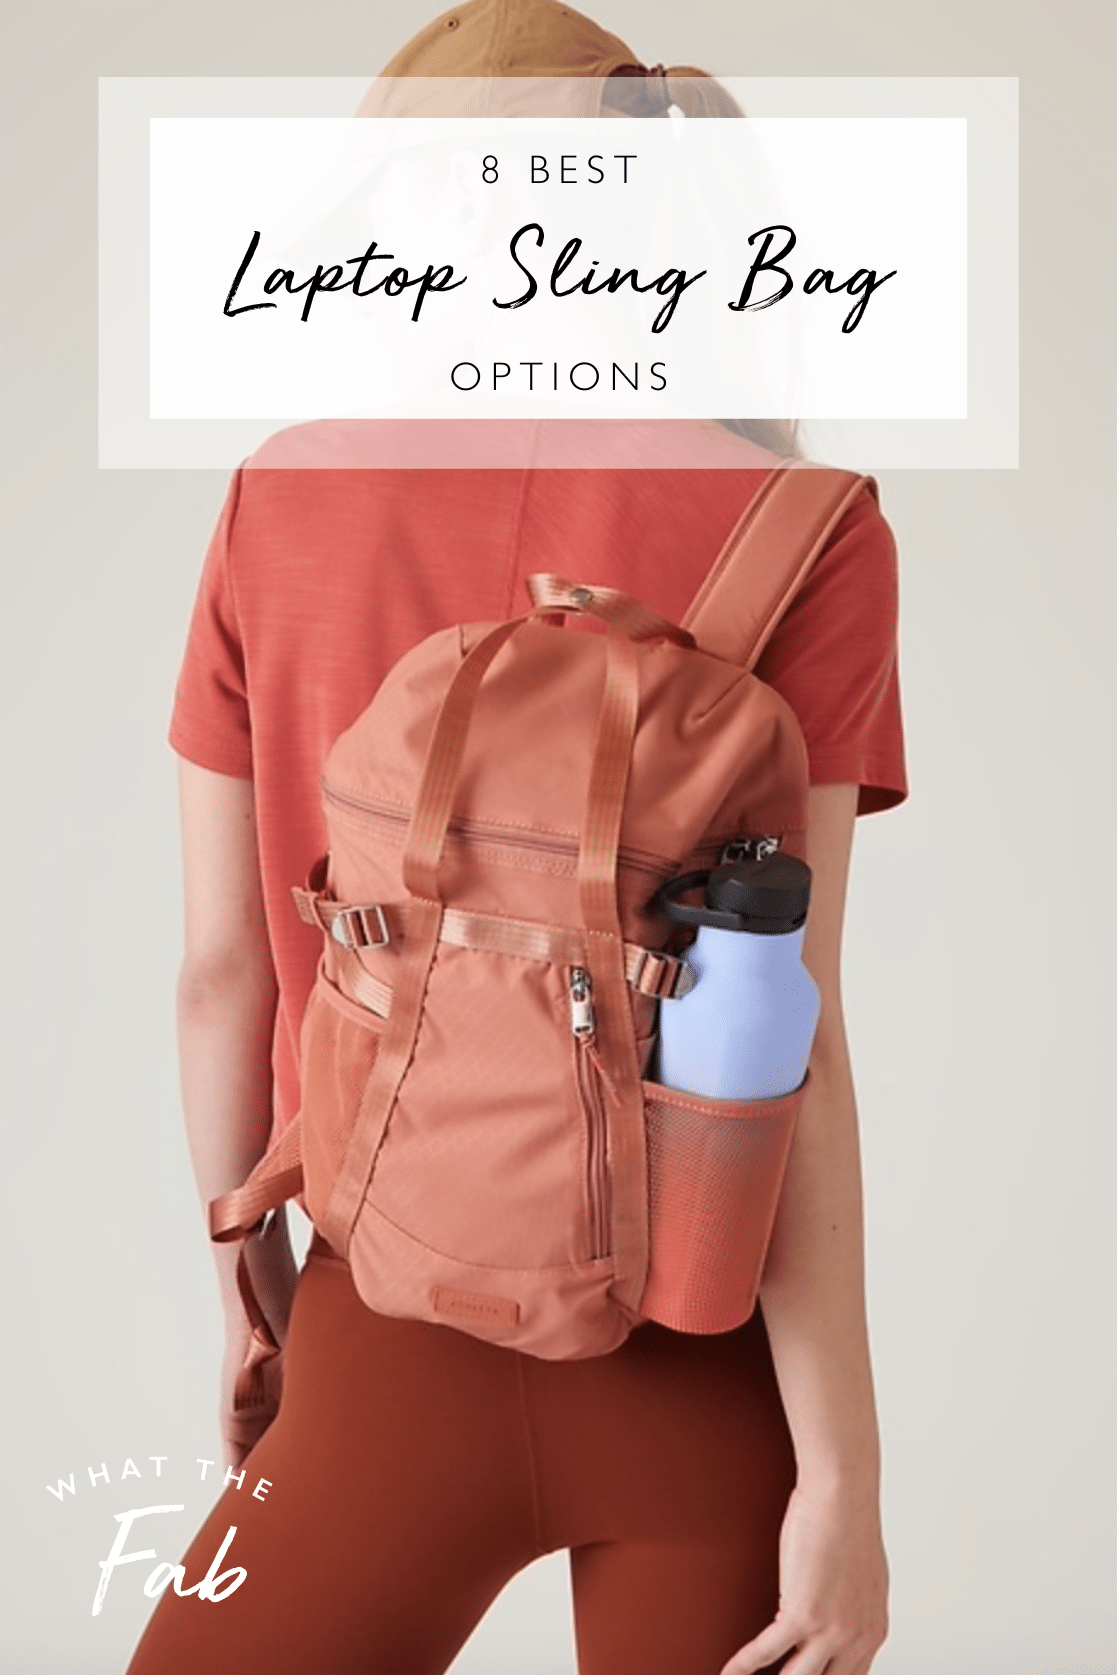 Best laptop sling bag options, by fashion blogger What The Fab